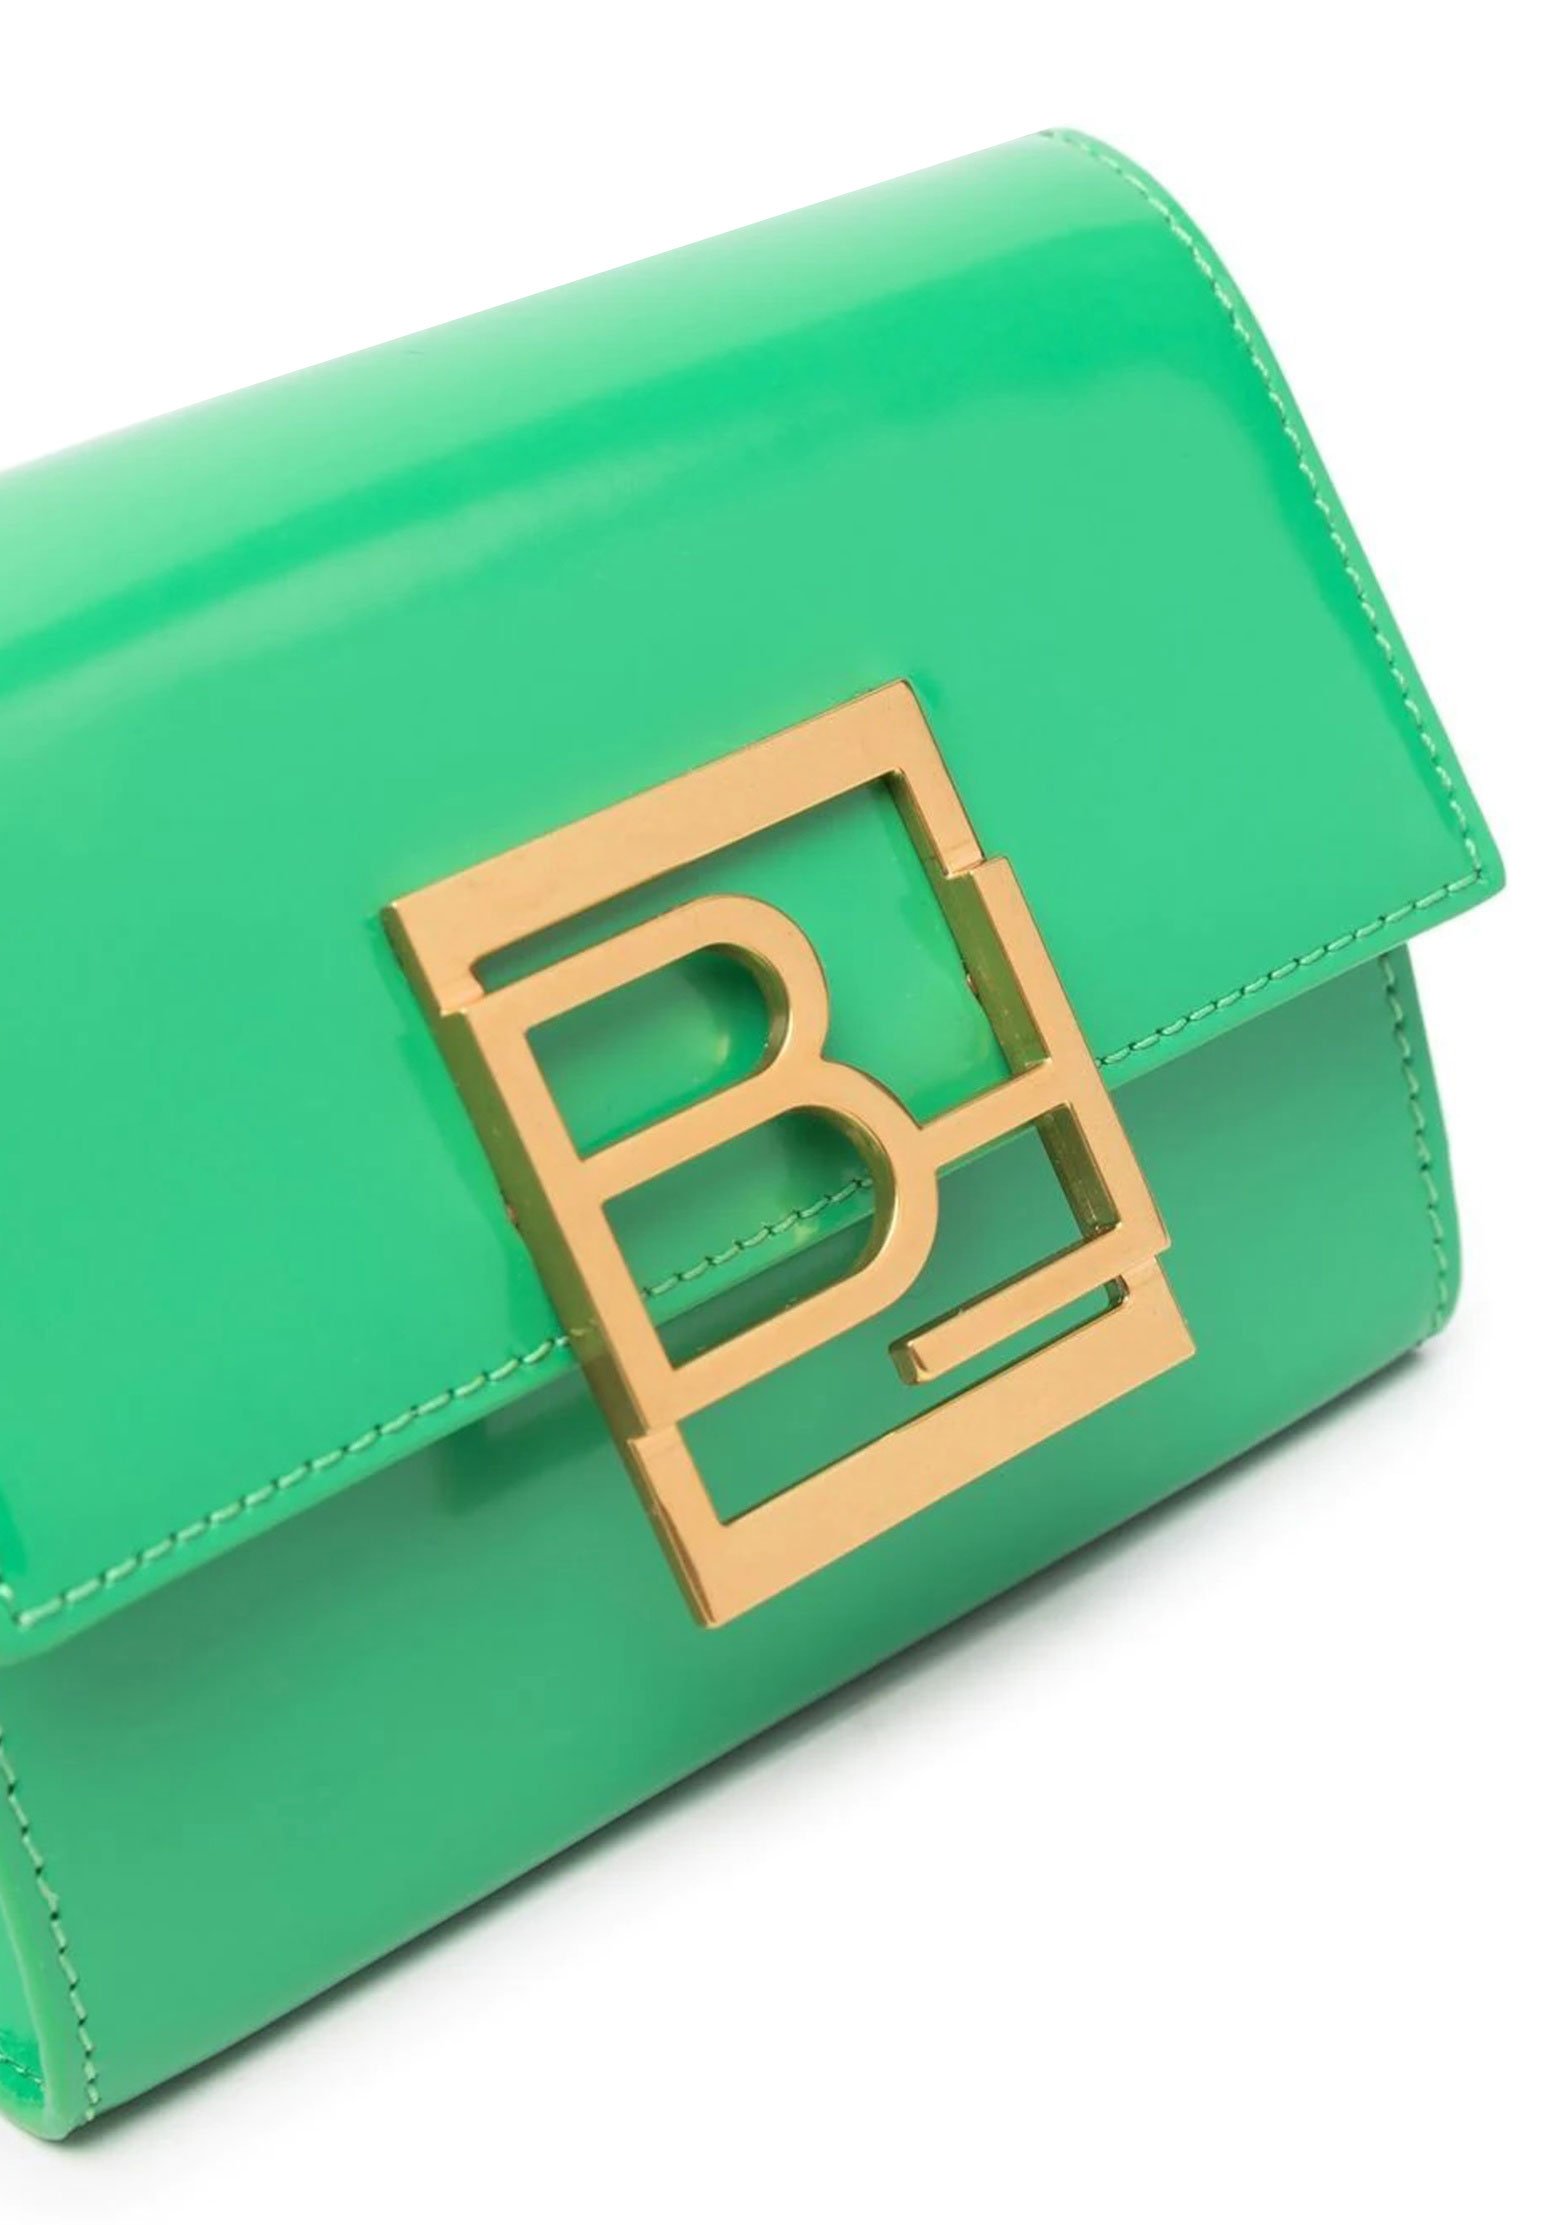 Bag BY FAR Color: green (Code: 602) in online store Allure